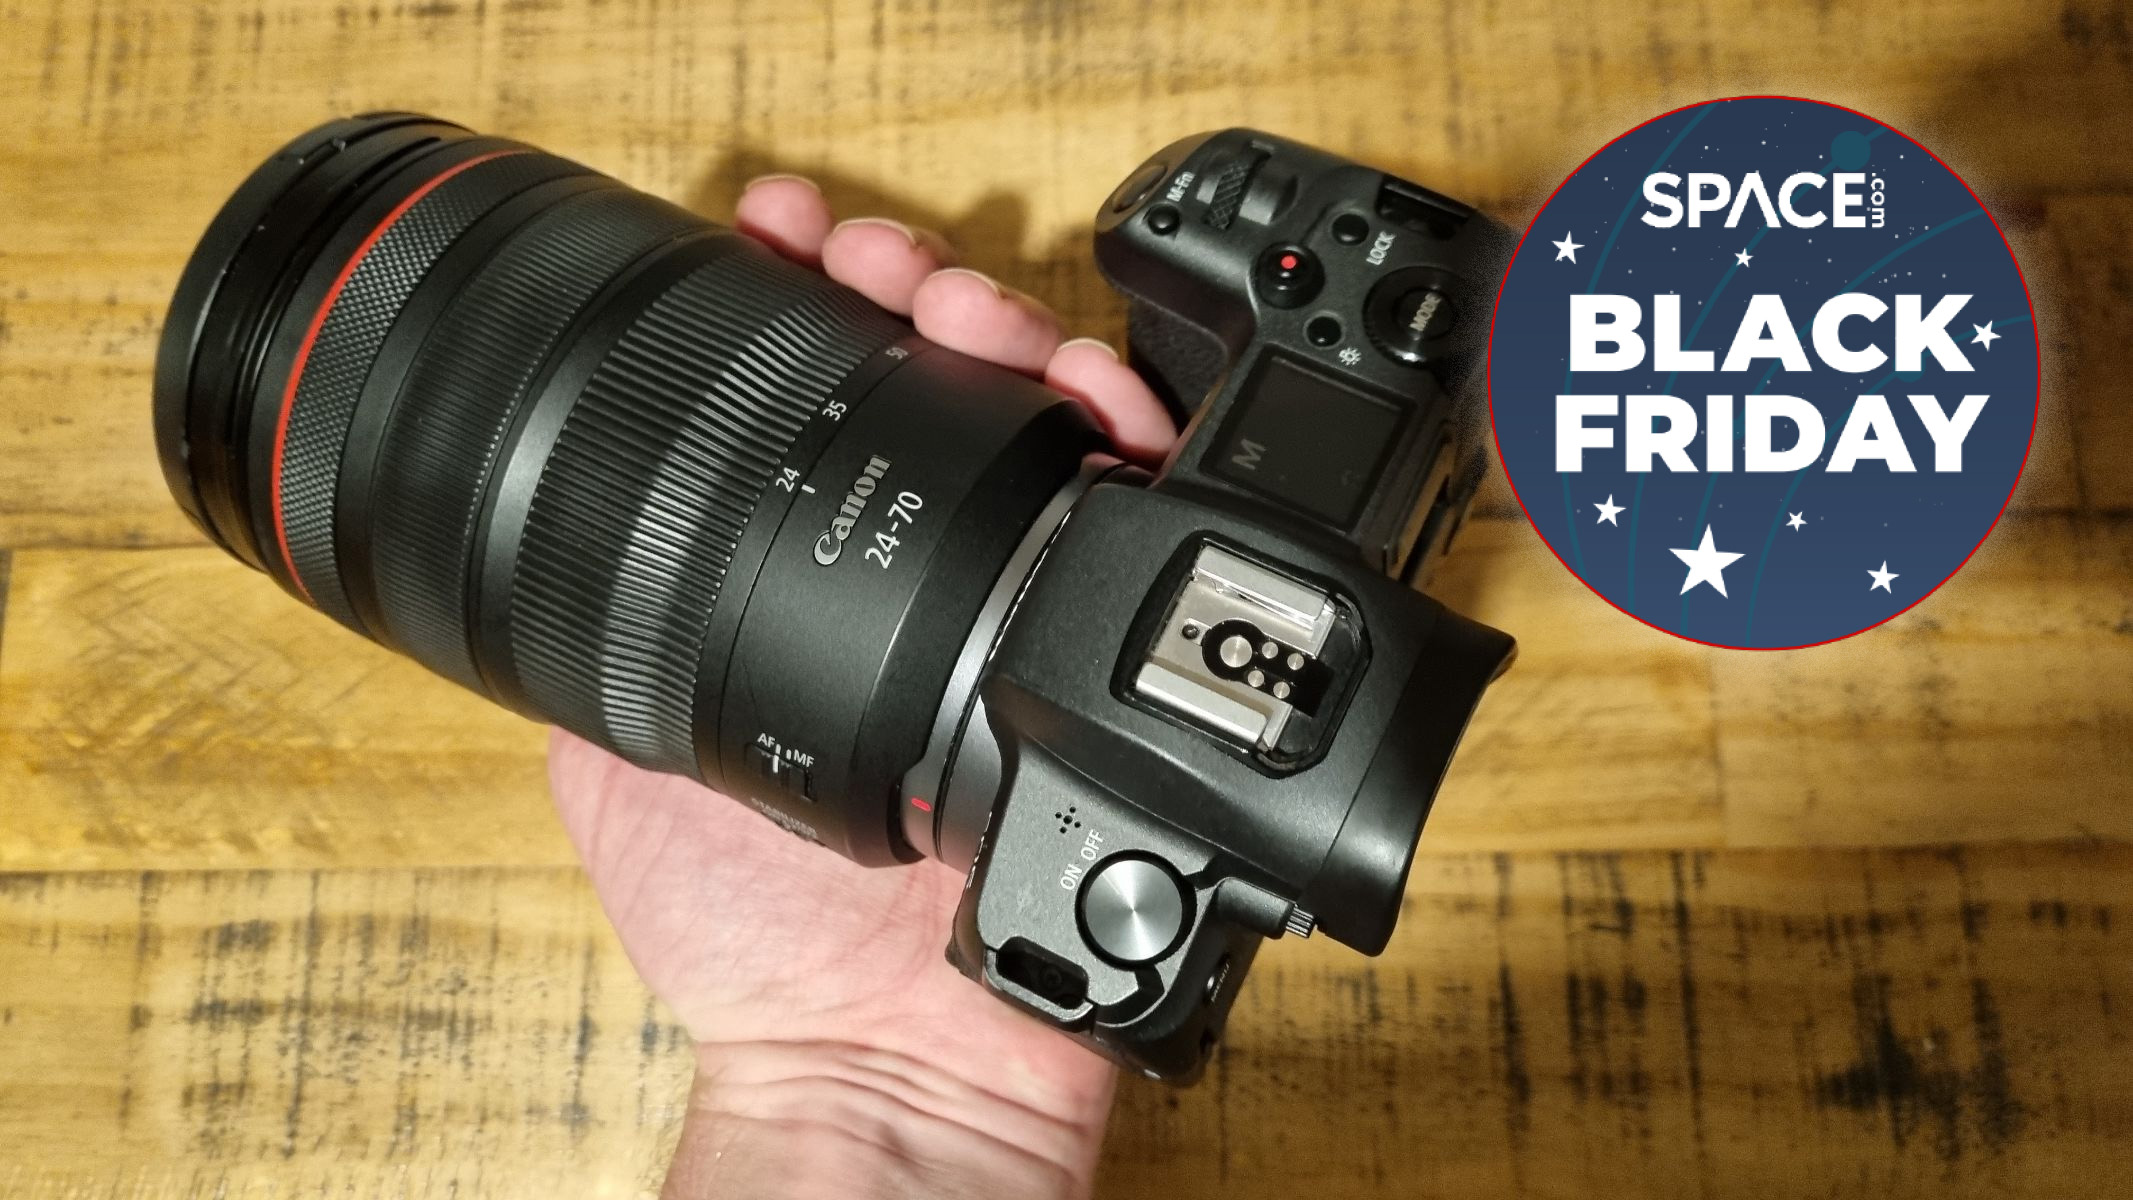 Save an incredible $500 on the Canon RF 24-70mm f/2.8 L IS USM lens this Black Friday Space